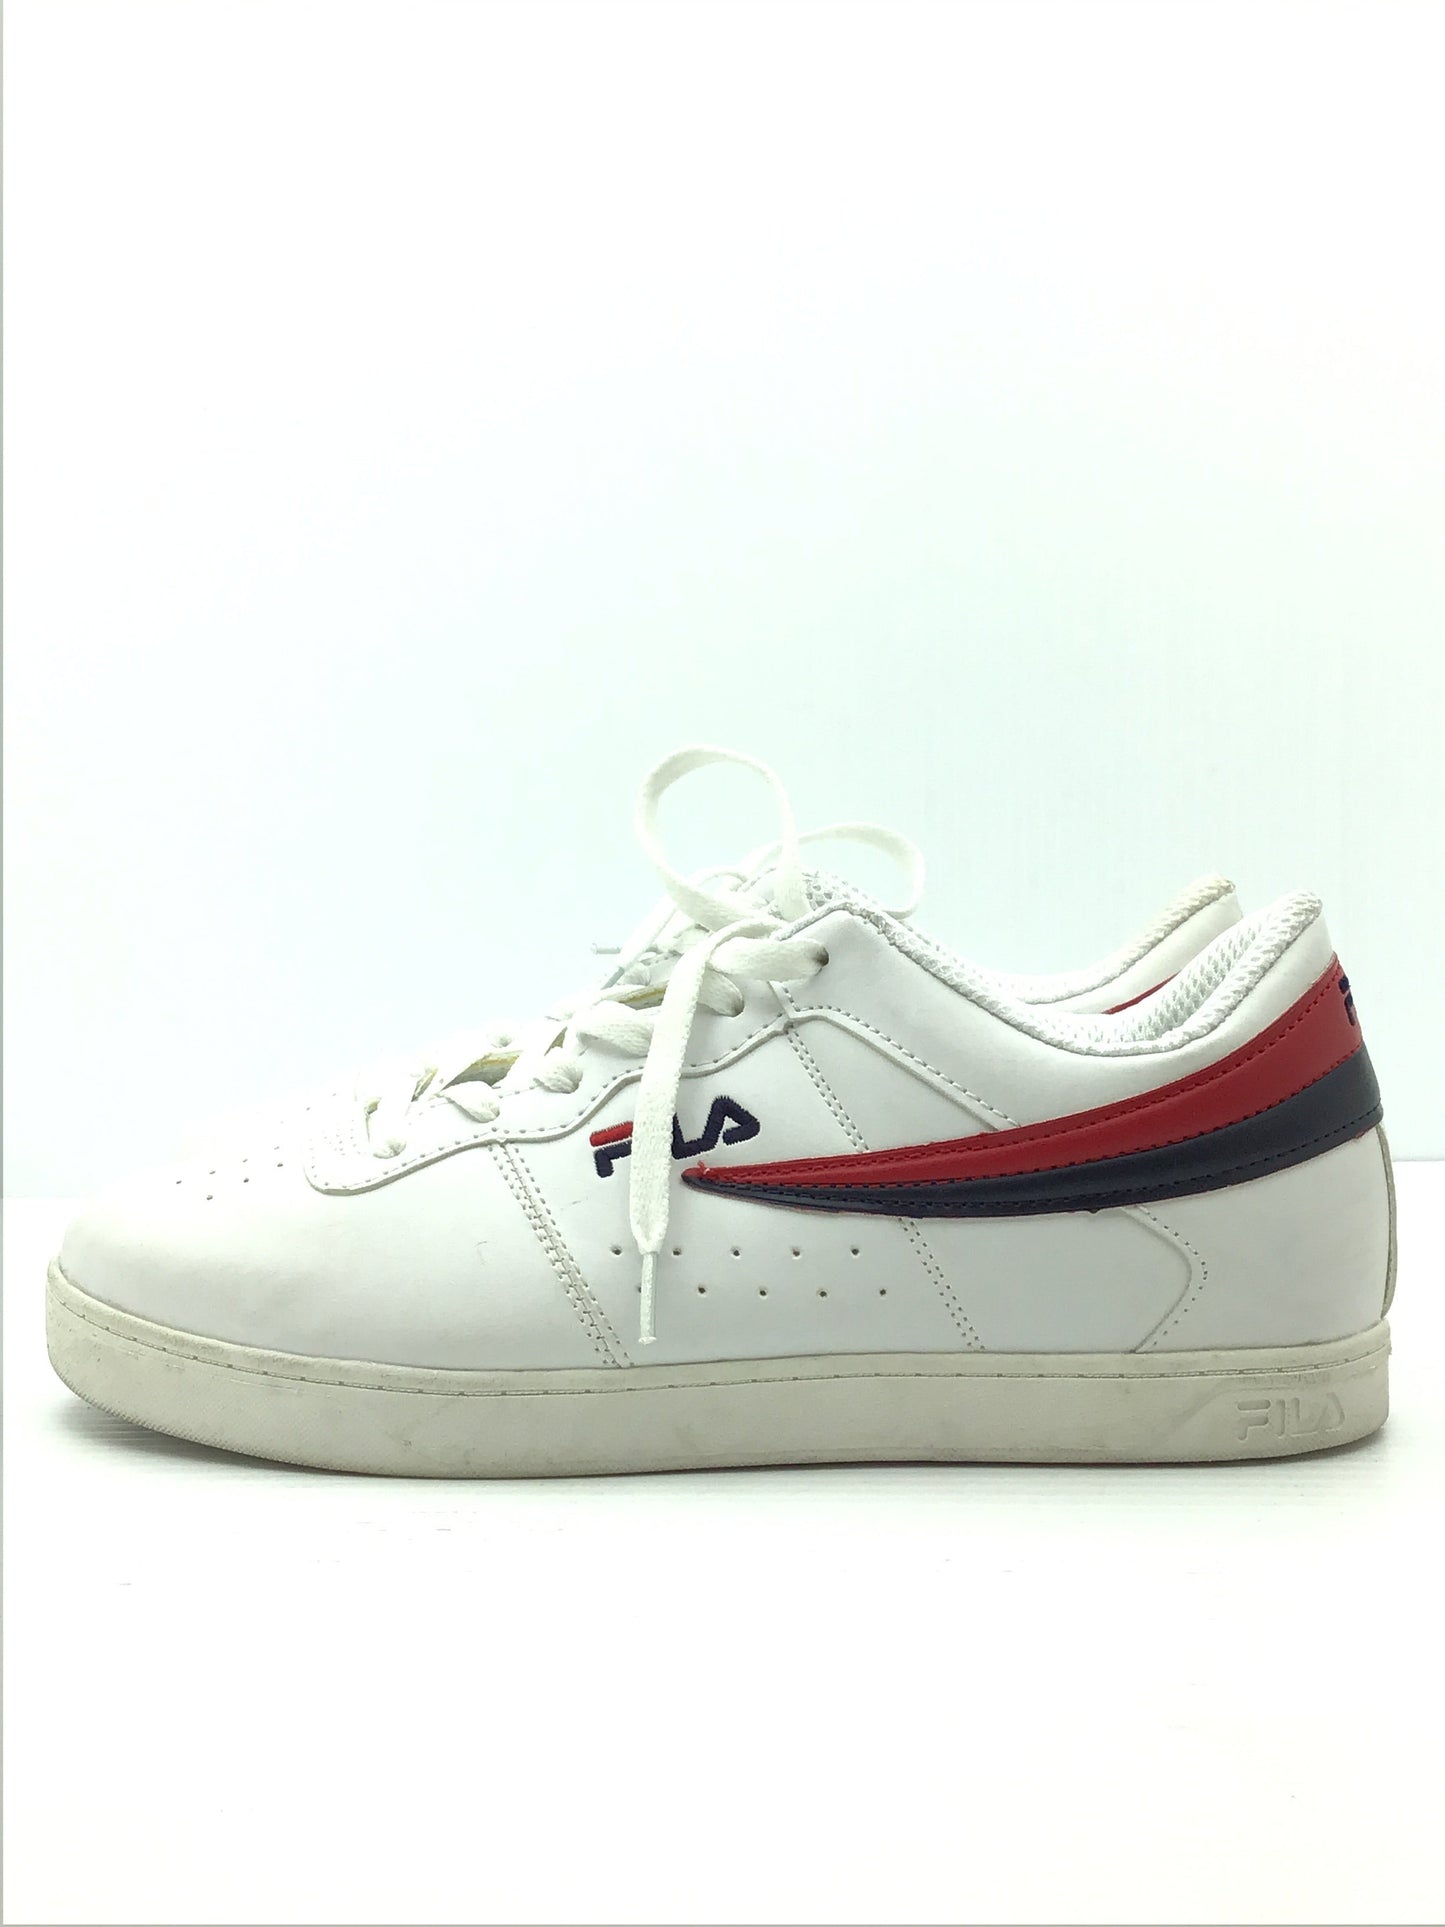 Shoes Sneakers By Fila  Size: 10